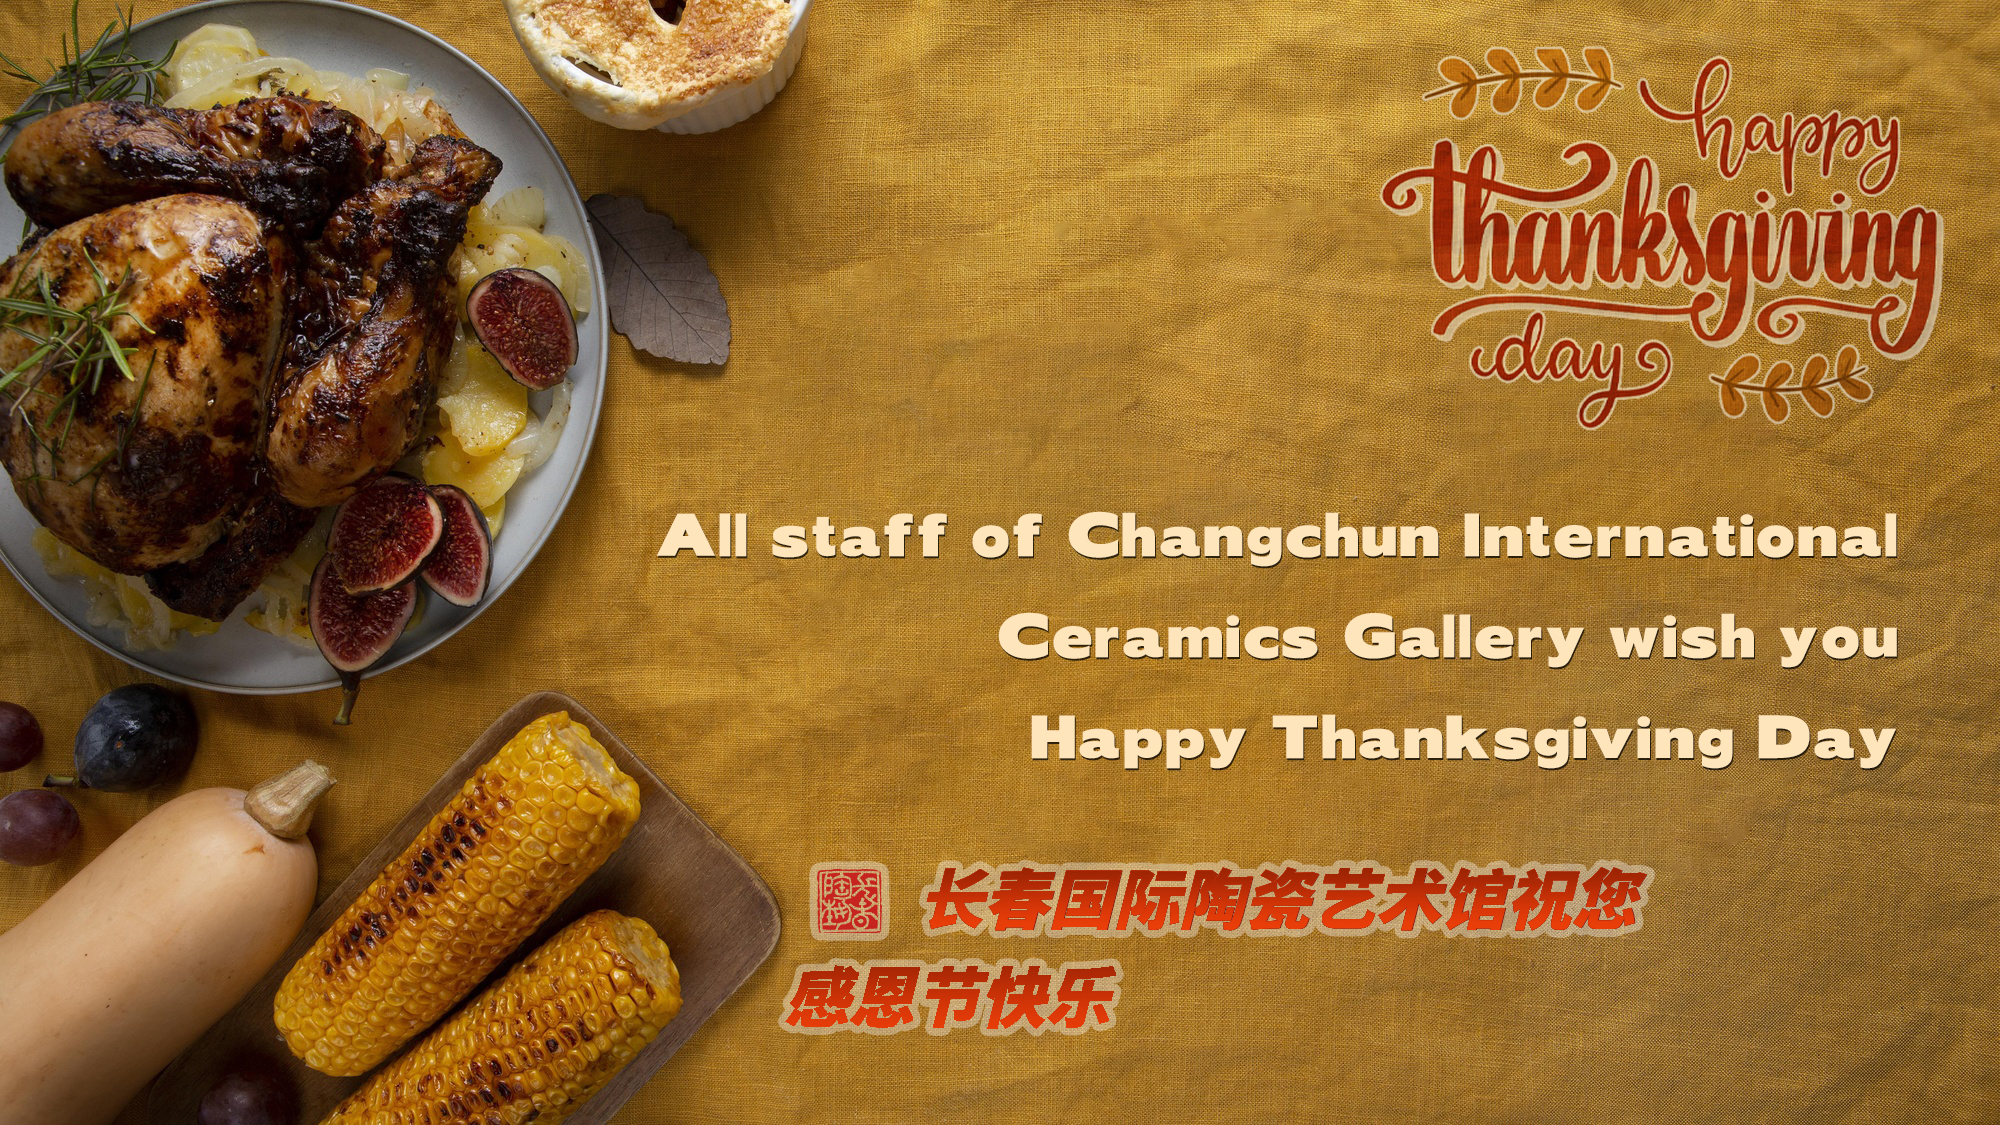 All staff of Changchun International Ceramics Gallery wish you Happy Thanksgiving Day